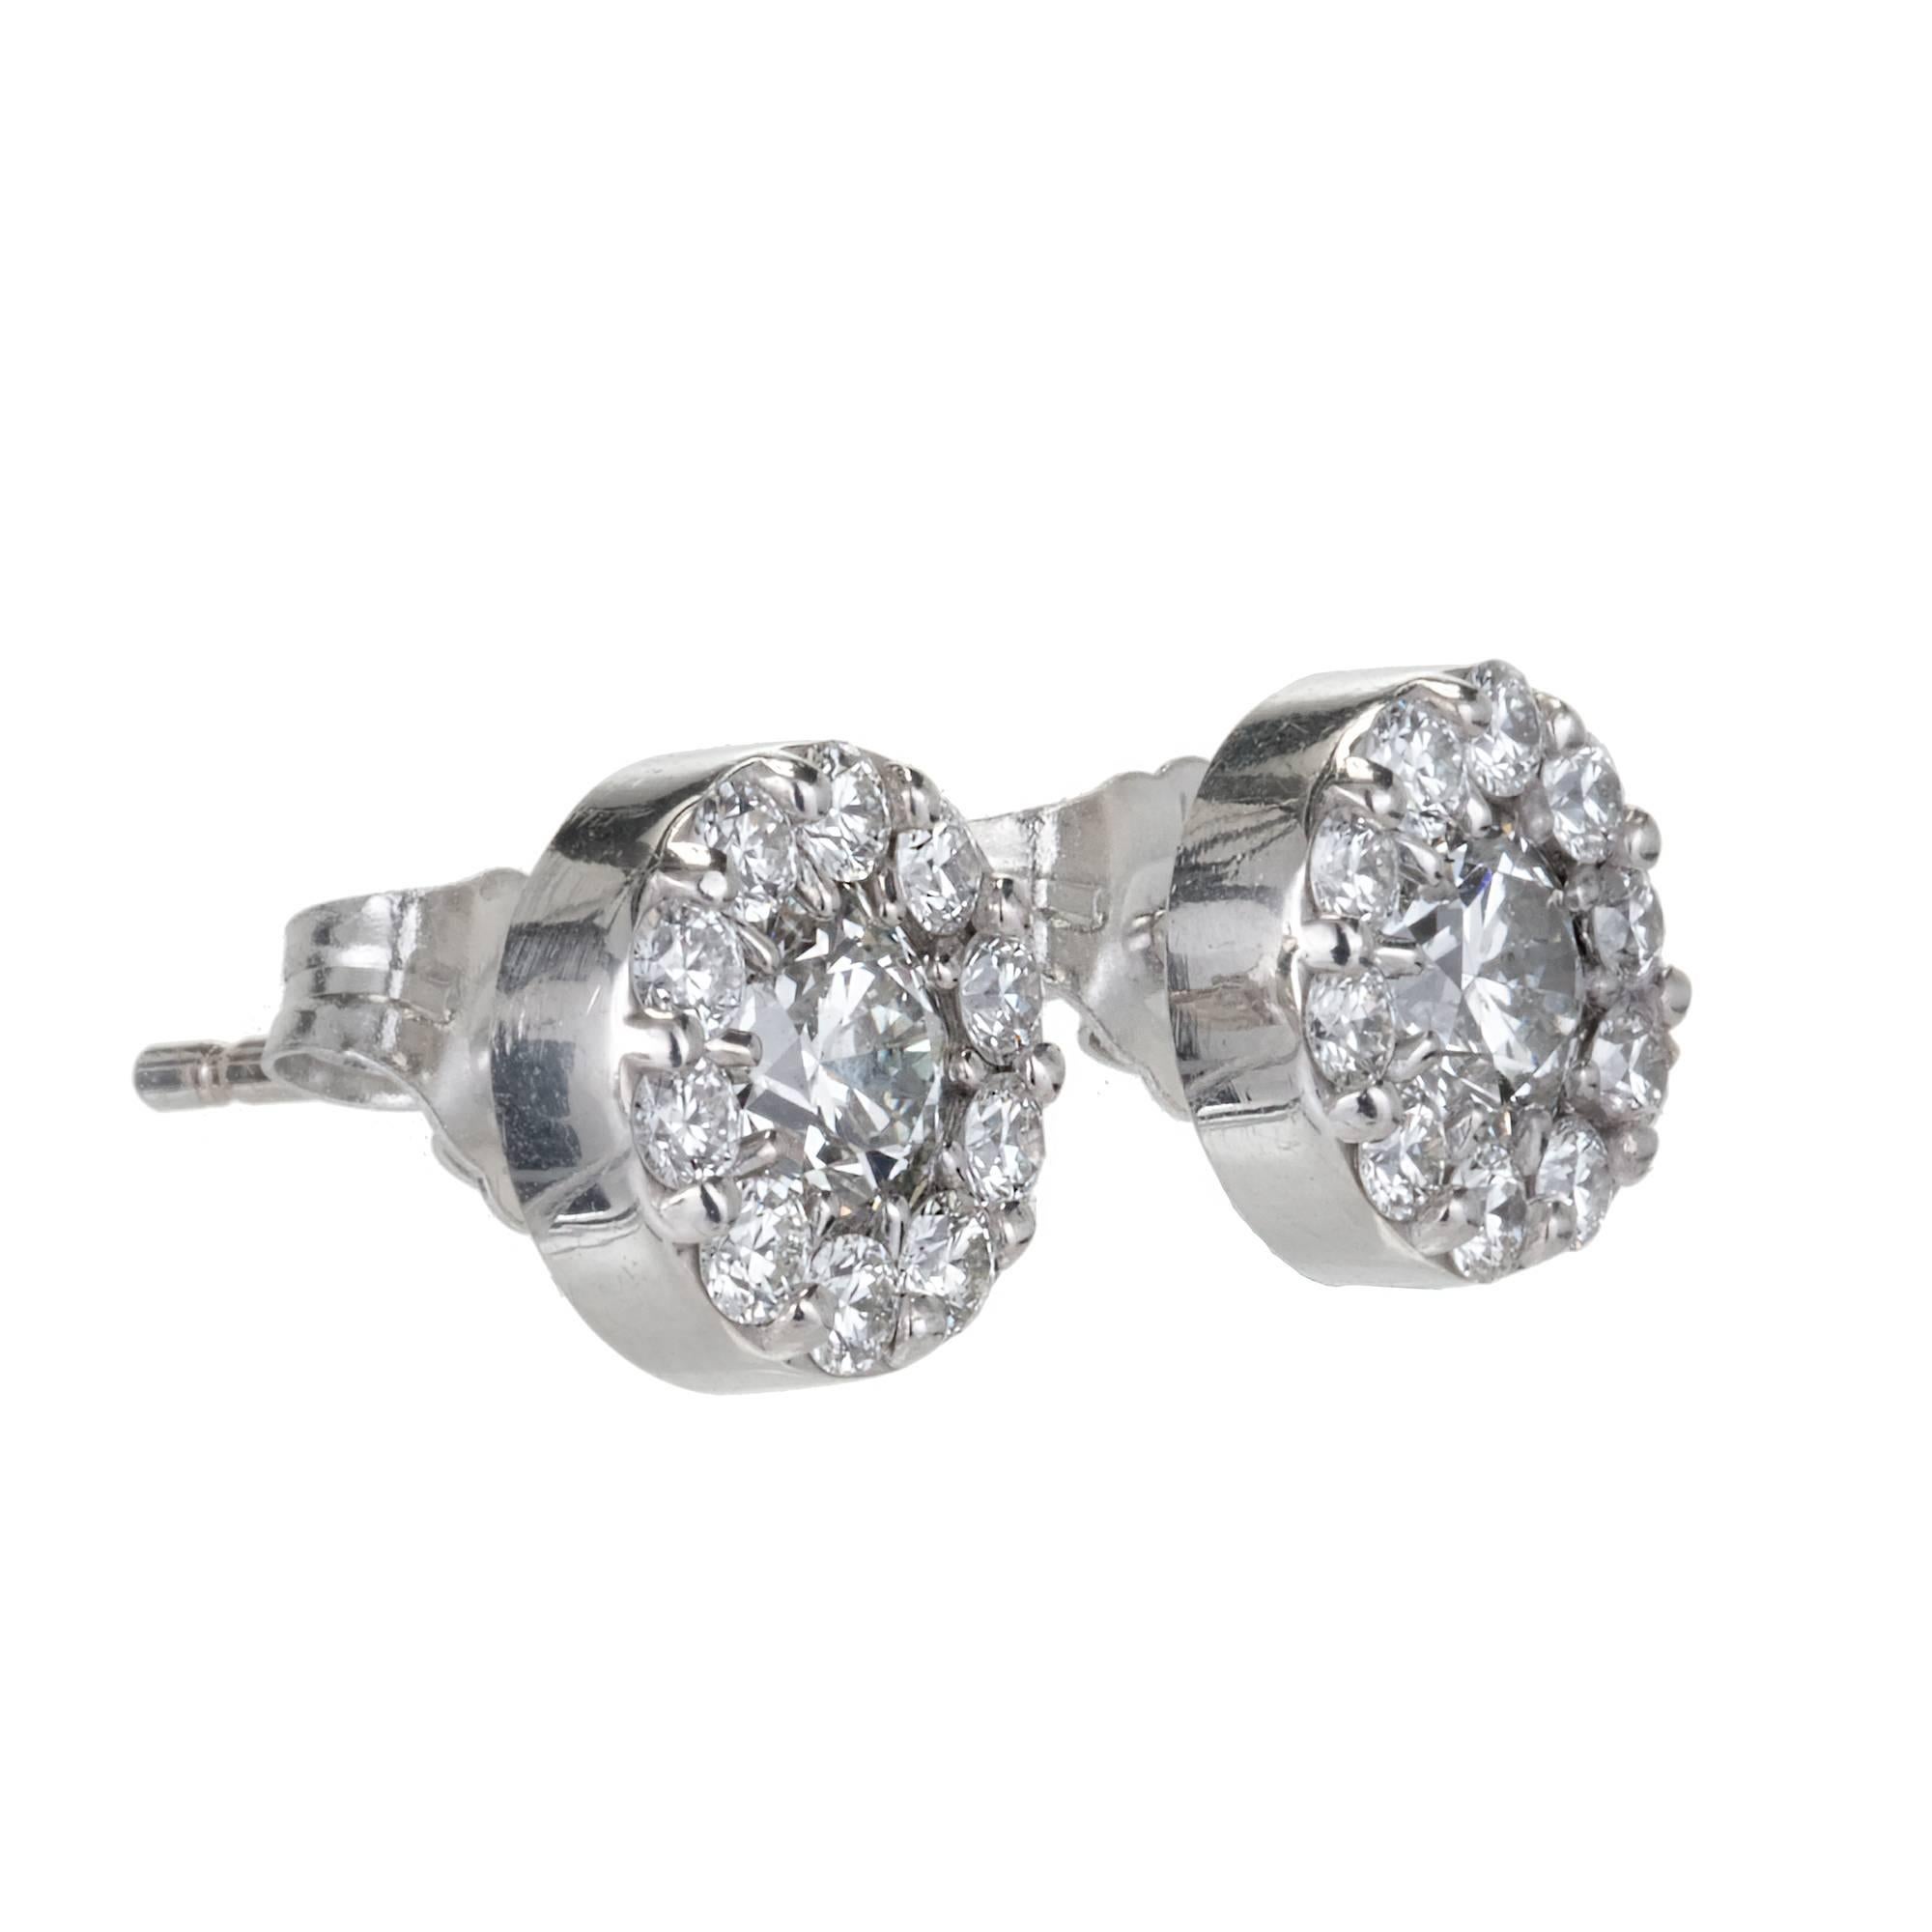 Halo 7mm round diamond cluster stud earrings  
1.00ct total weight.

2 round brilliant cut diamonds, .50ct. total weight H, VS
20 round full cut diamonds, approx. total weight .50cts, H, VS
18k white gold
2.1 grams
Tested: 18k
Stamped: 750
